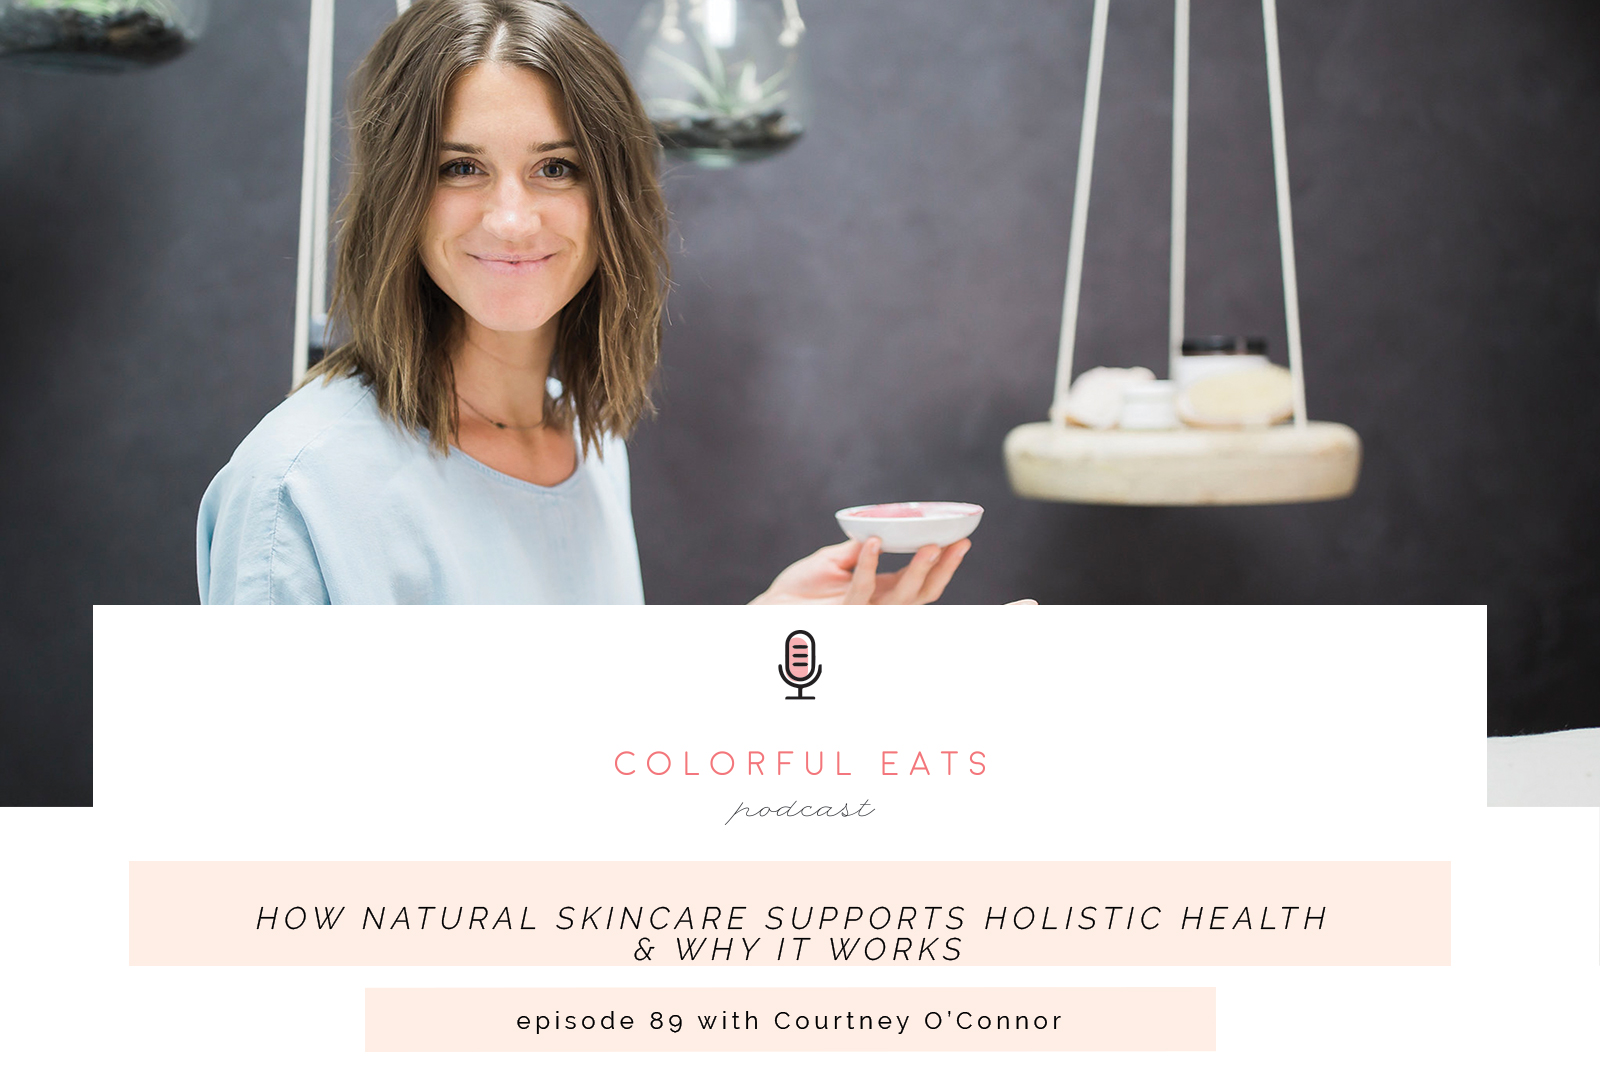 Episode 89: How Natural Skincare Supports Holistic Health & Why it Works